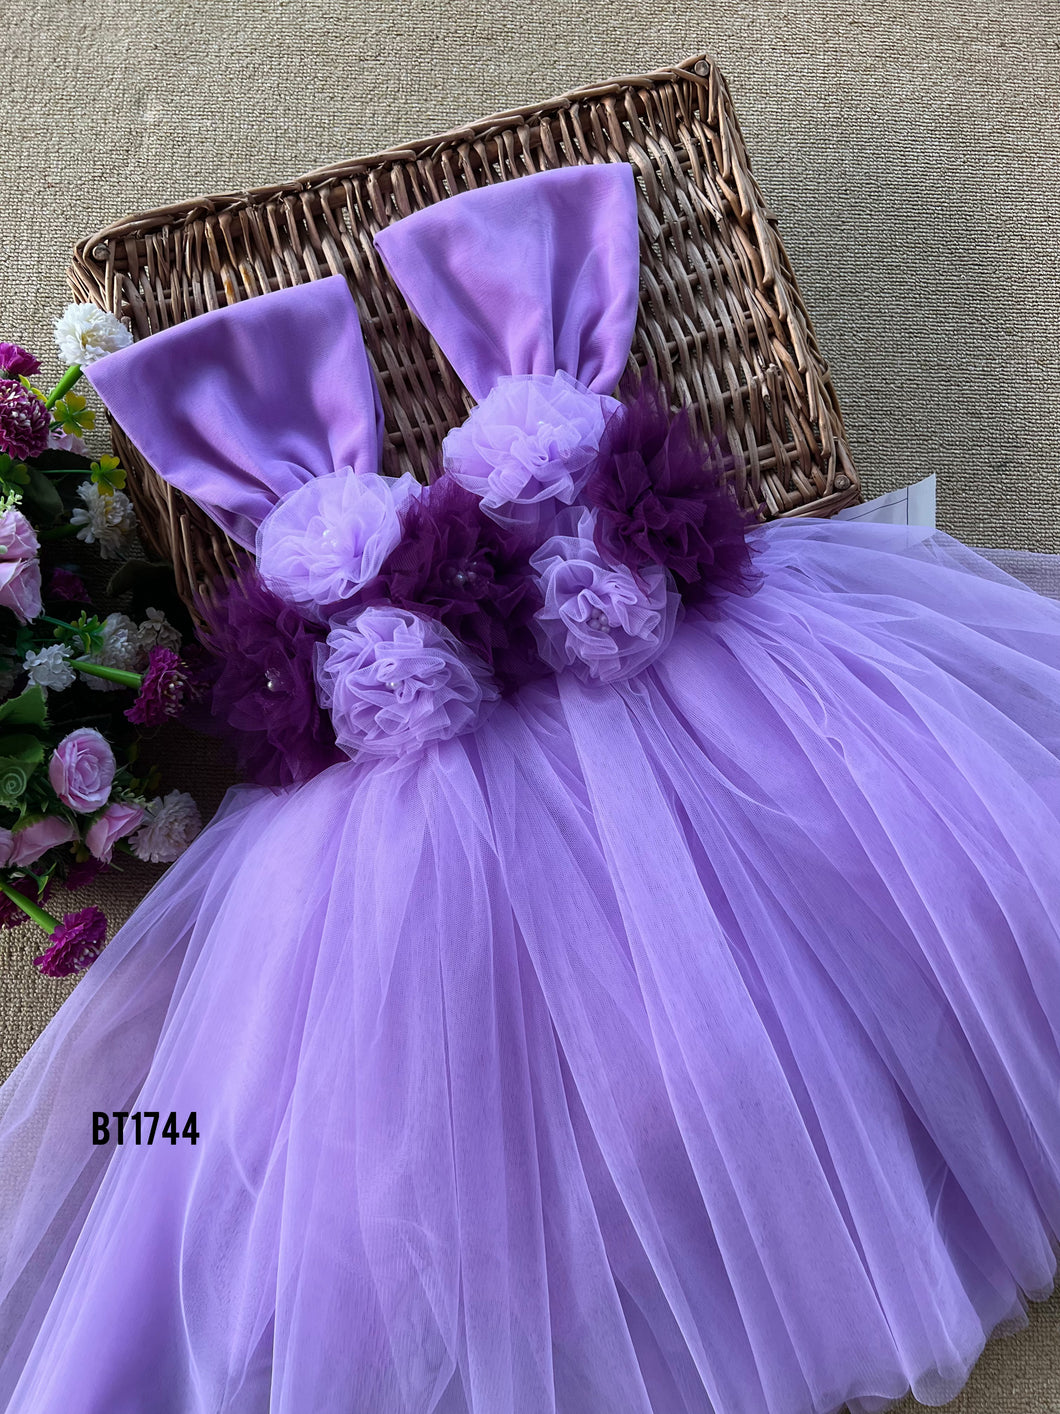 BT1744 Lilac Whisper Gown - Where Elegance Meets Whimsy